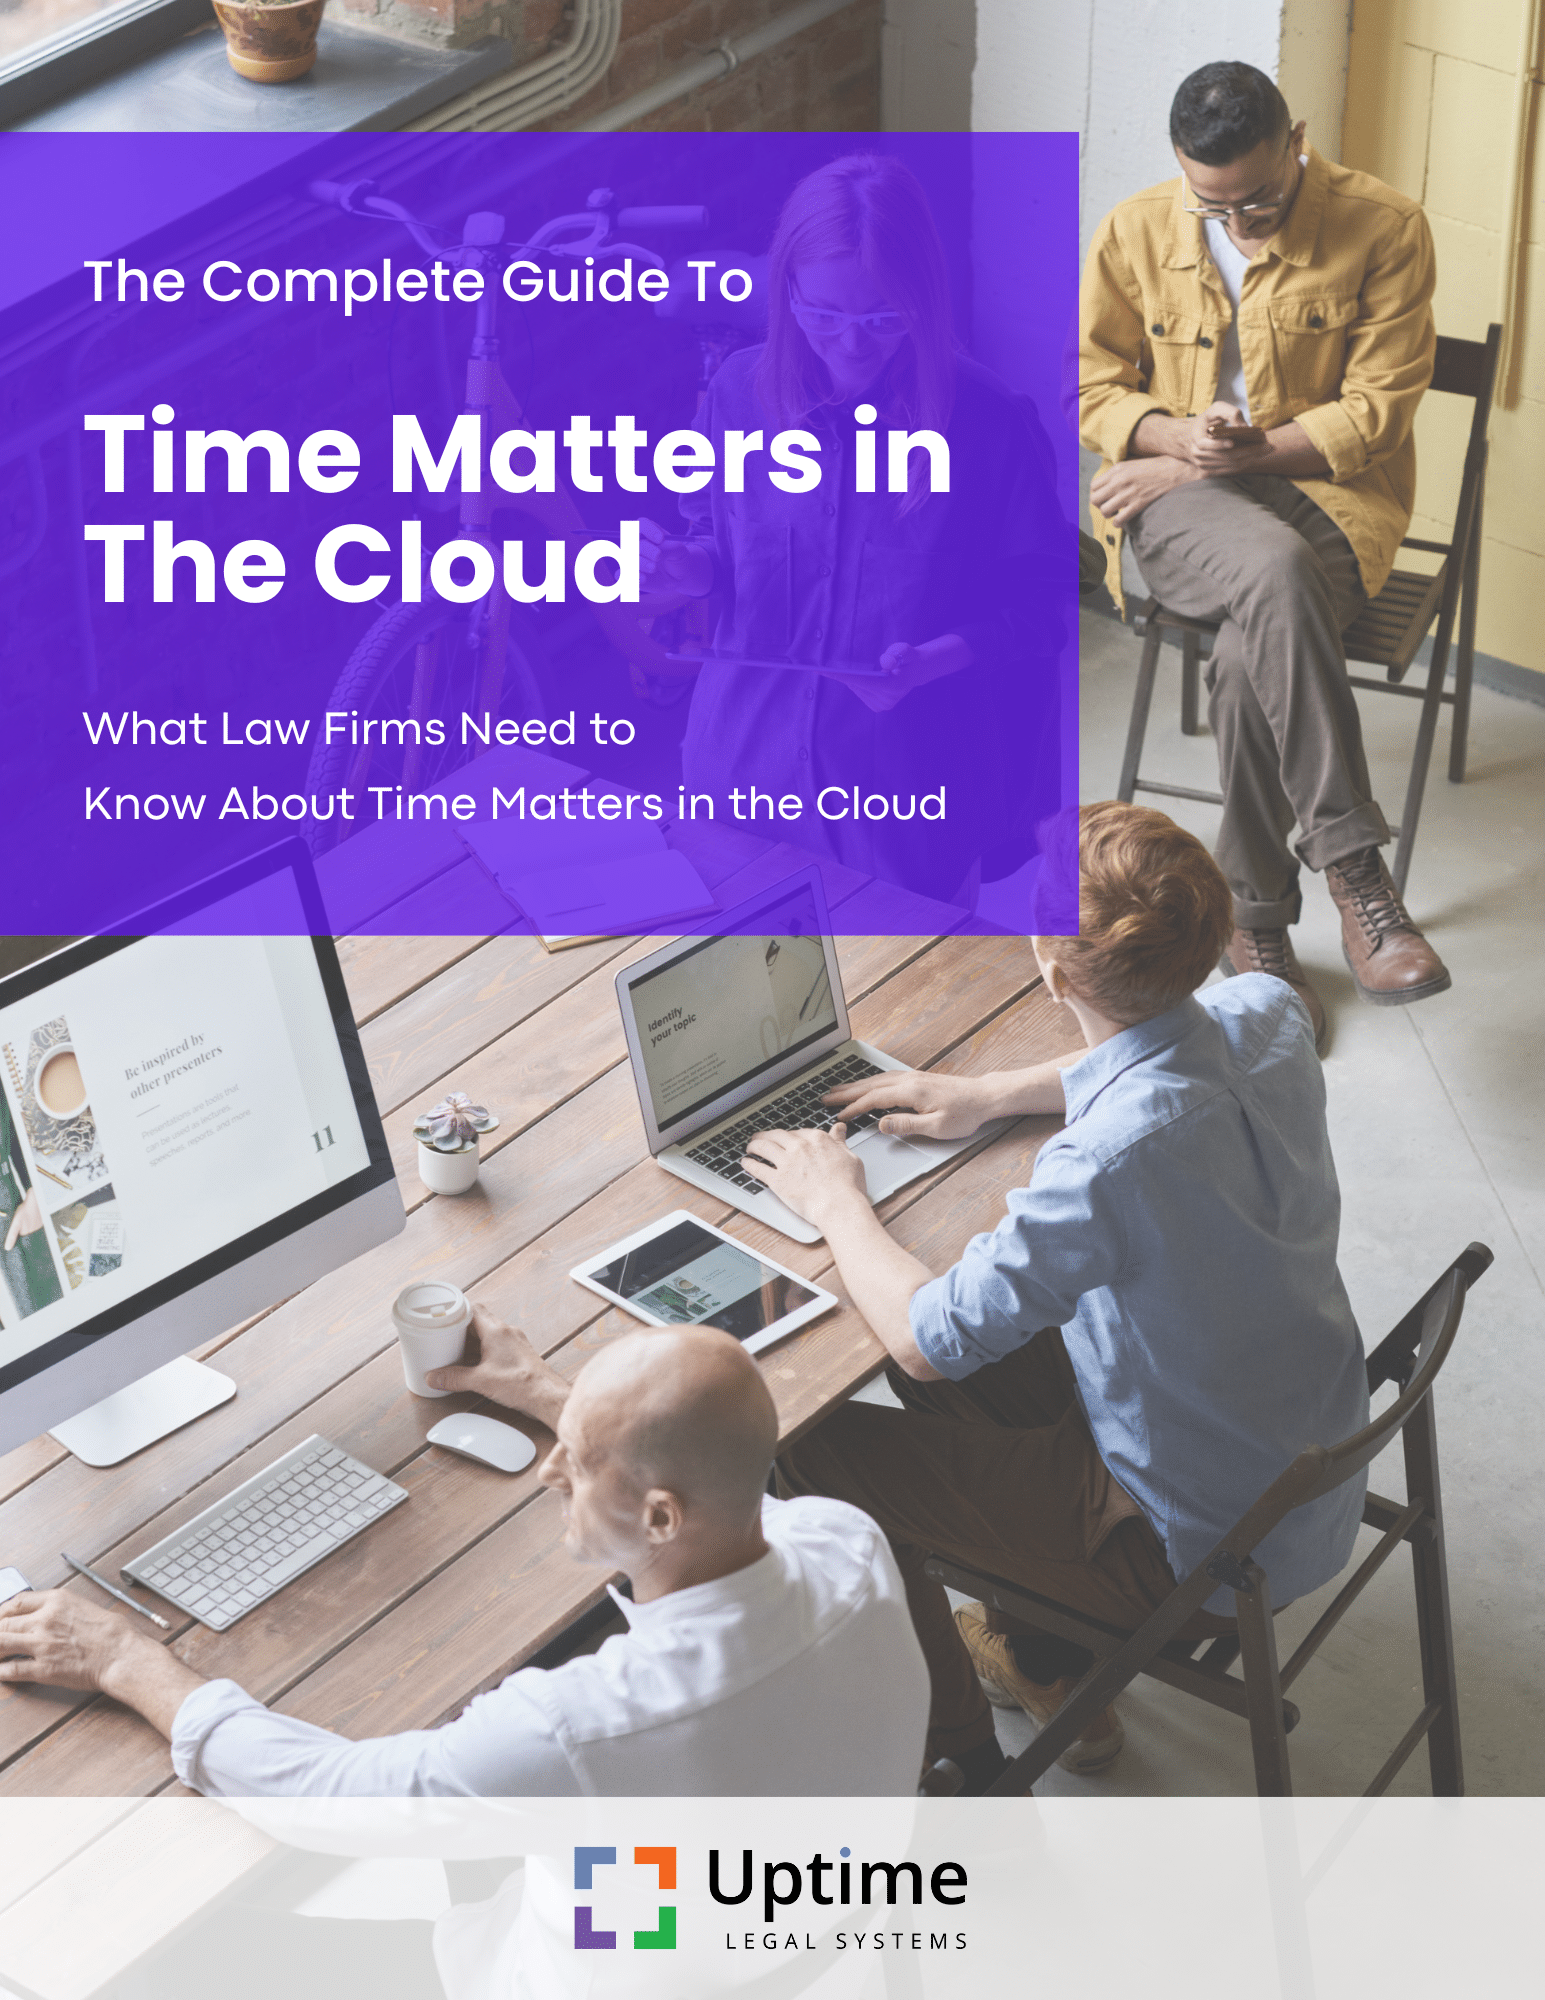 Time Matters in the Cloud Guide